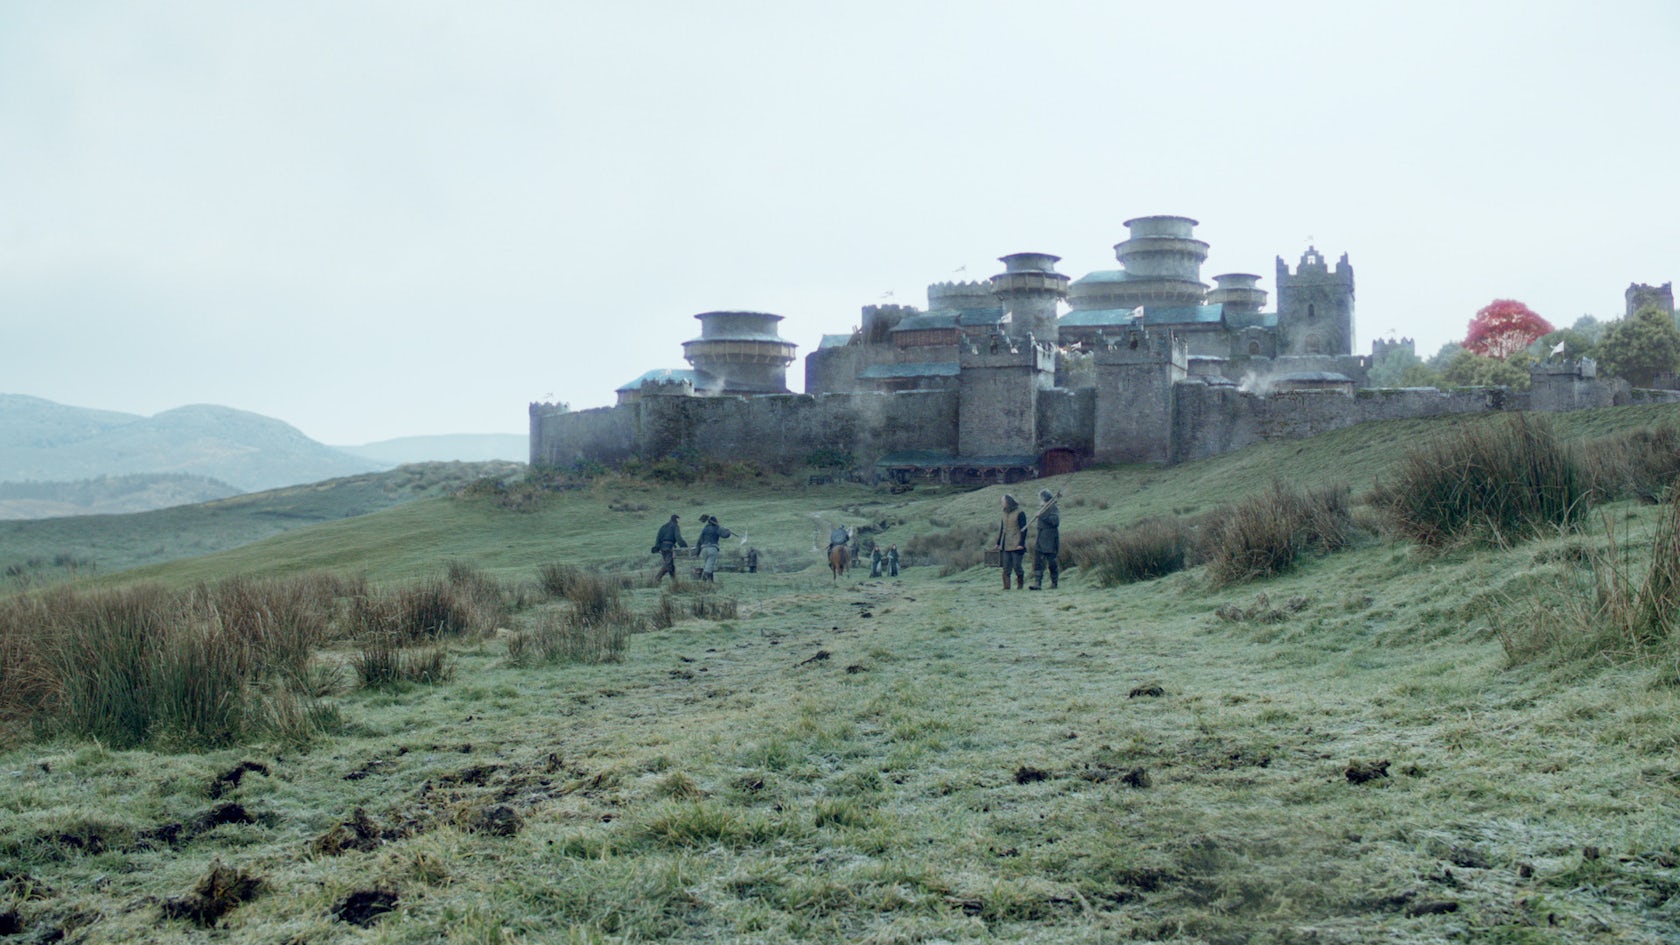 House of the Dragon, Game of Thrones Wiki